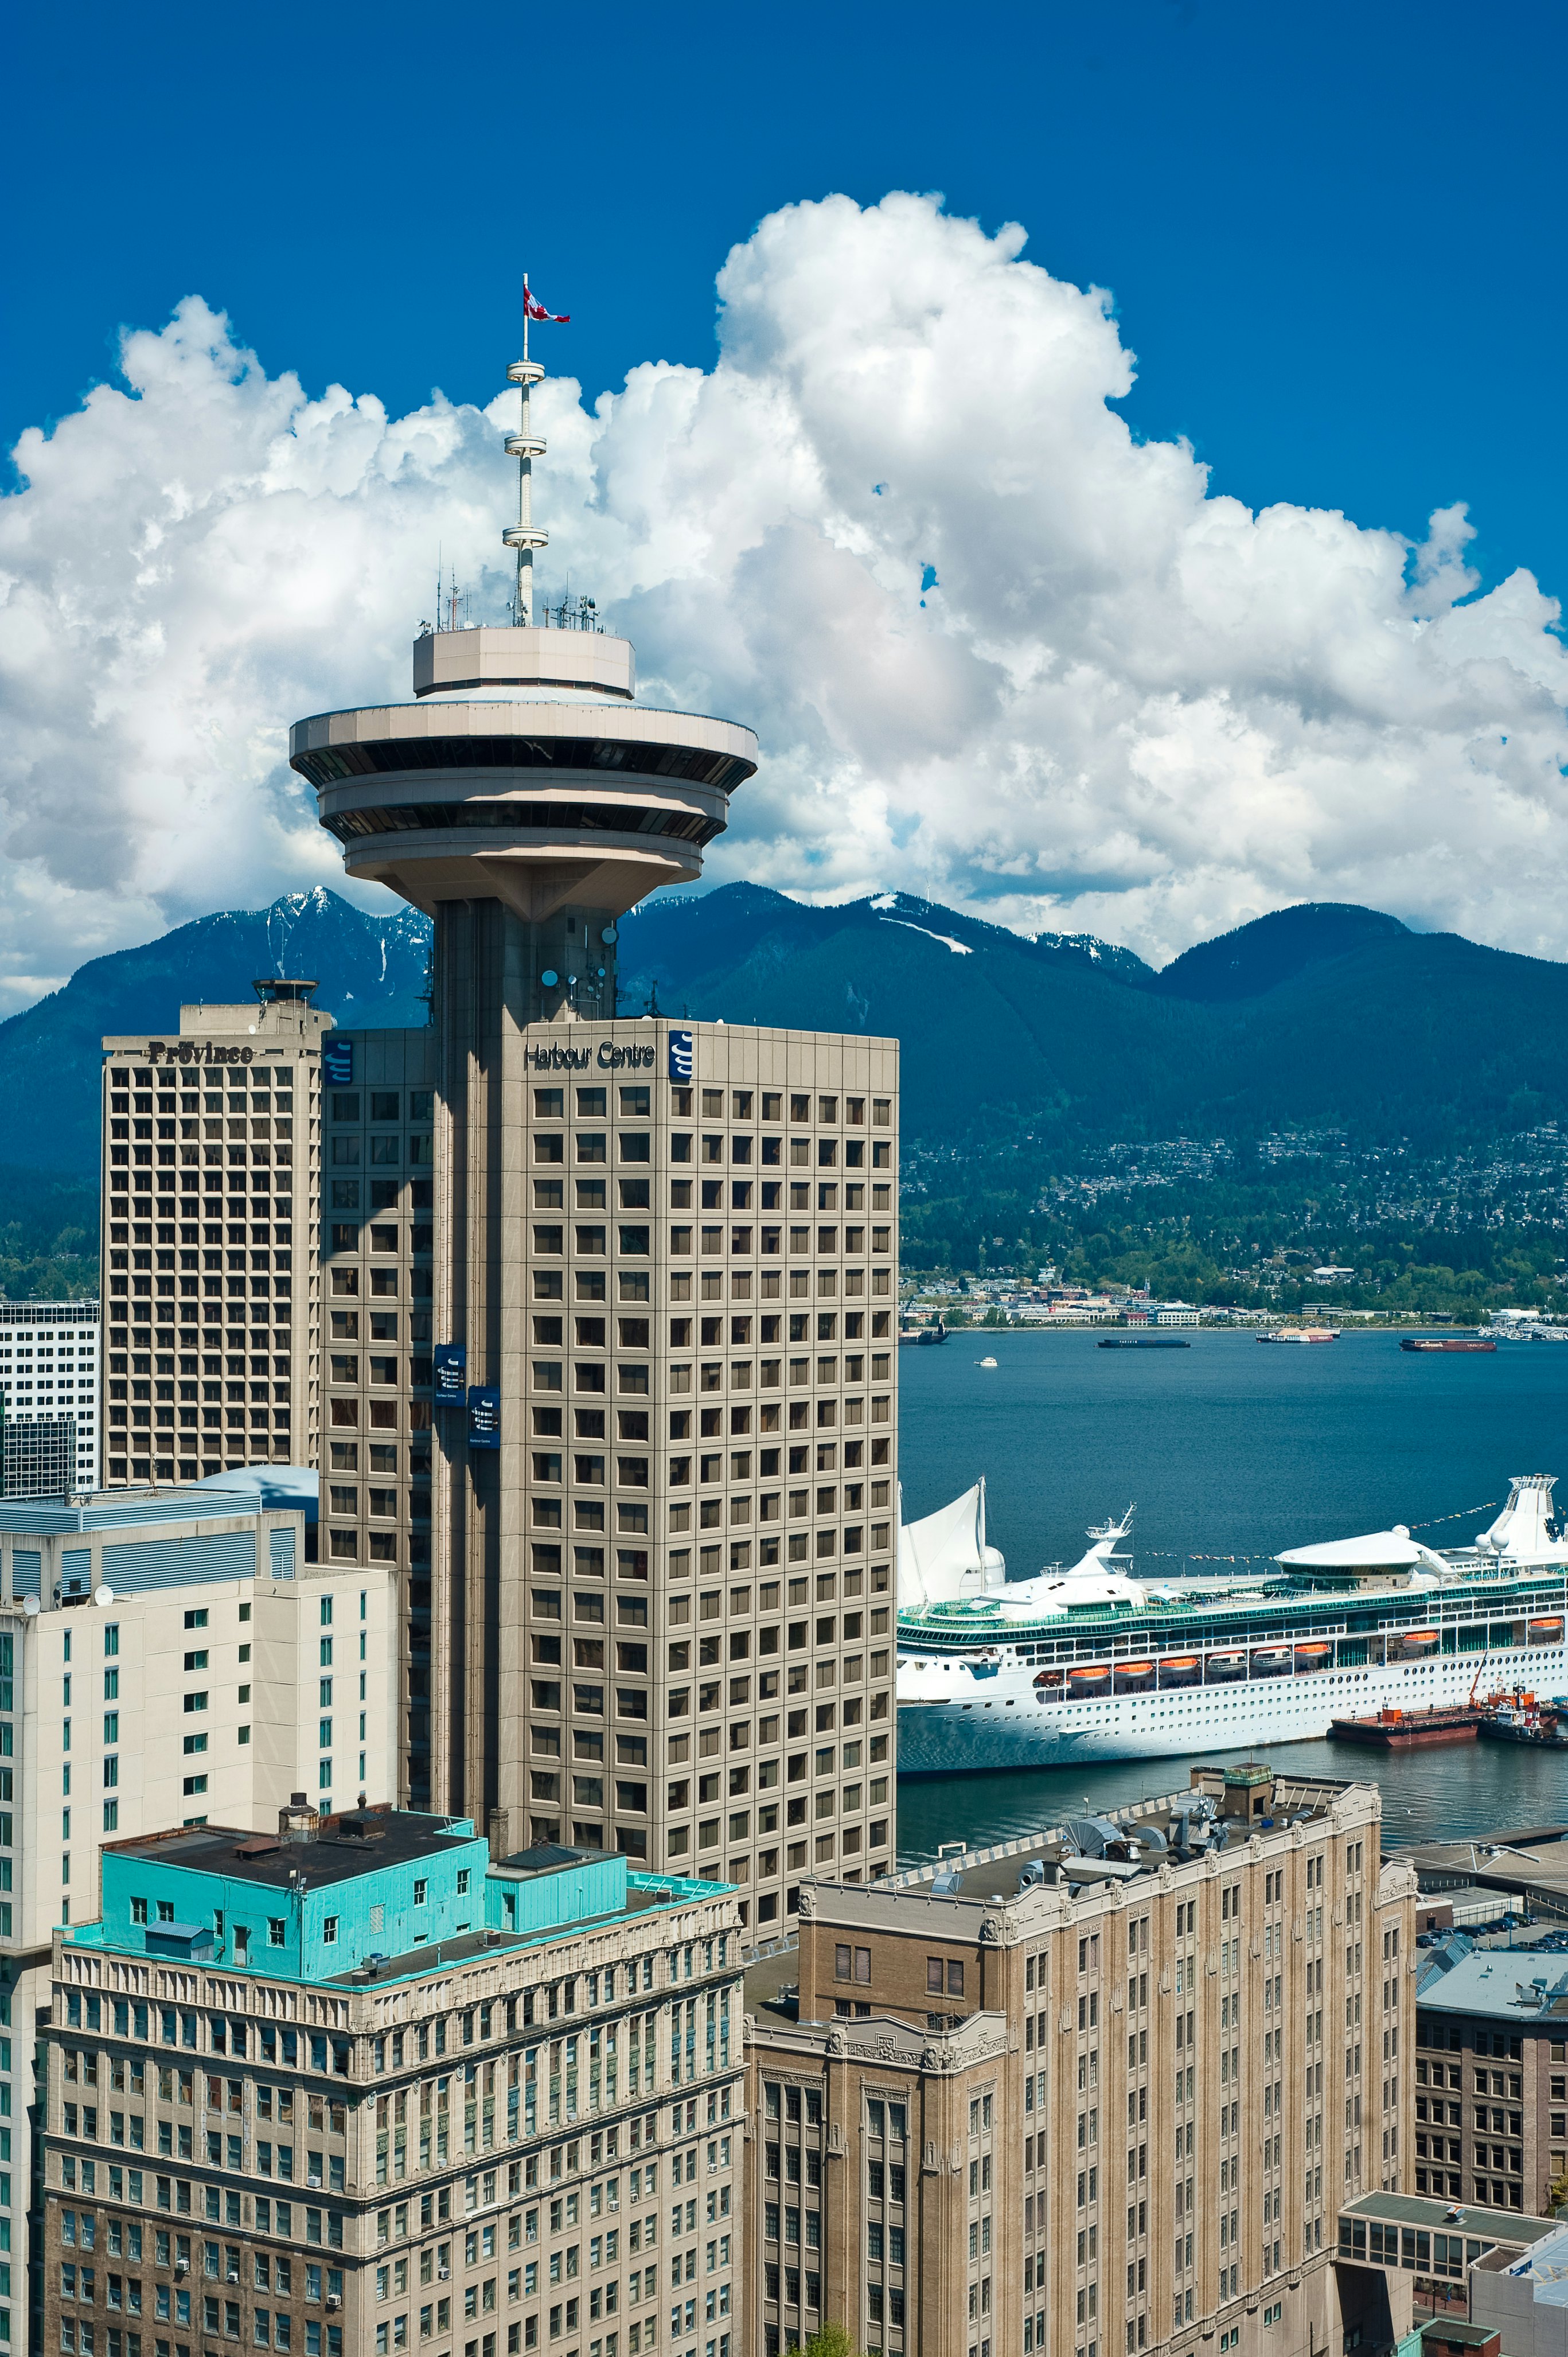 vancouver local tour package